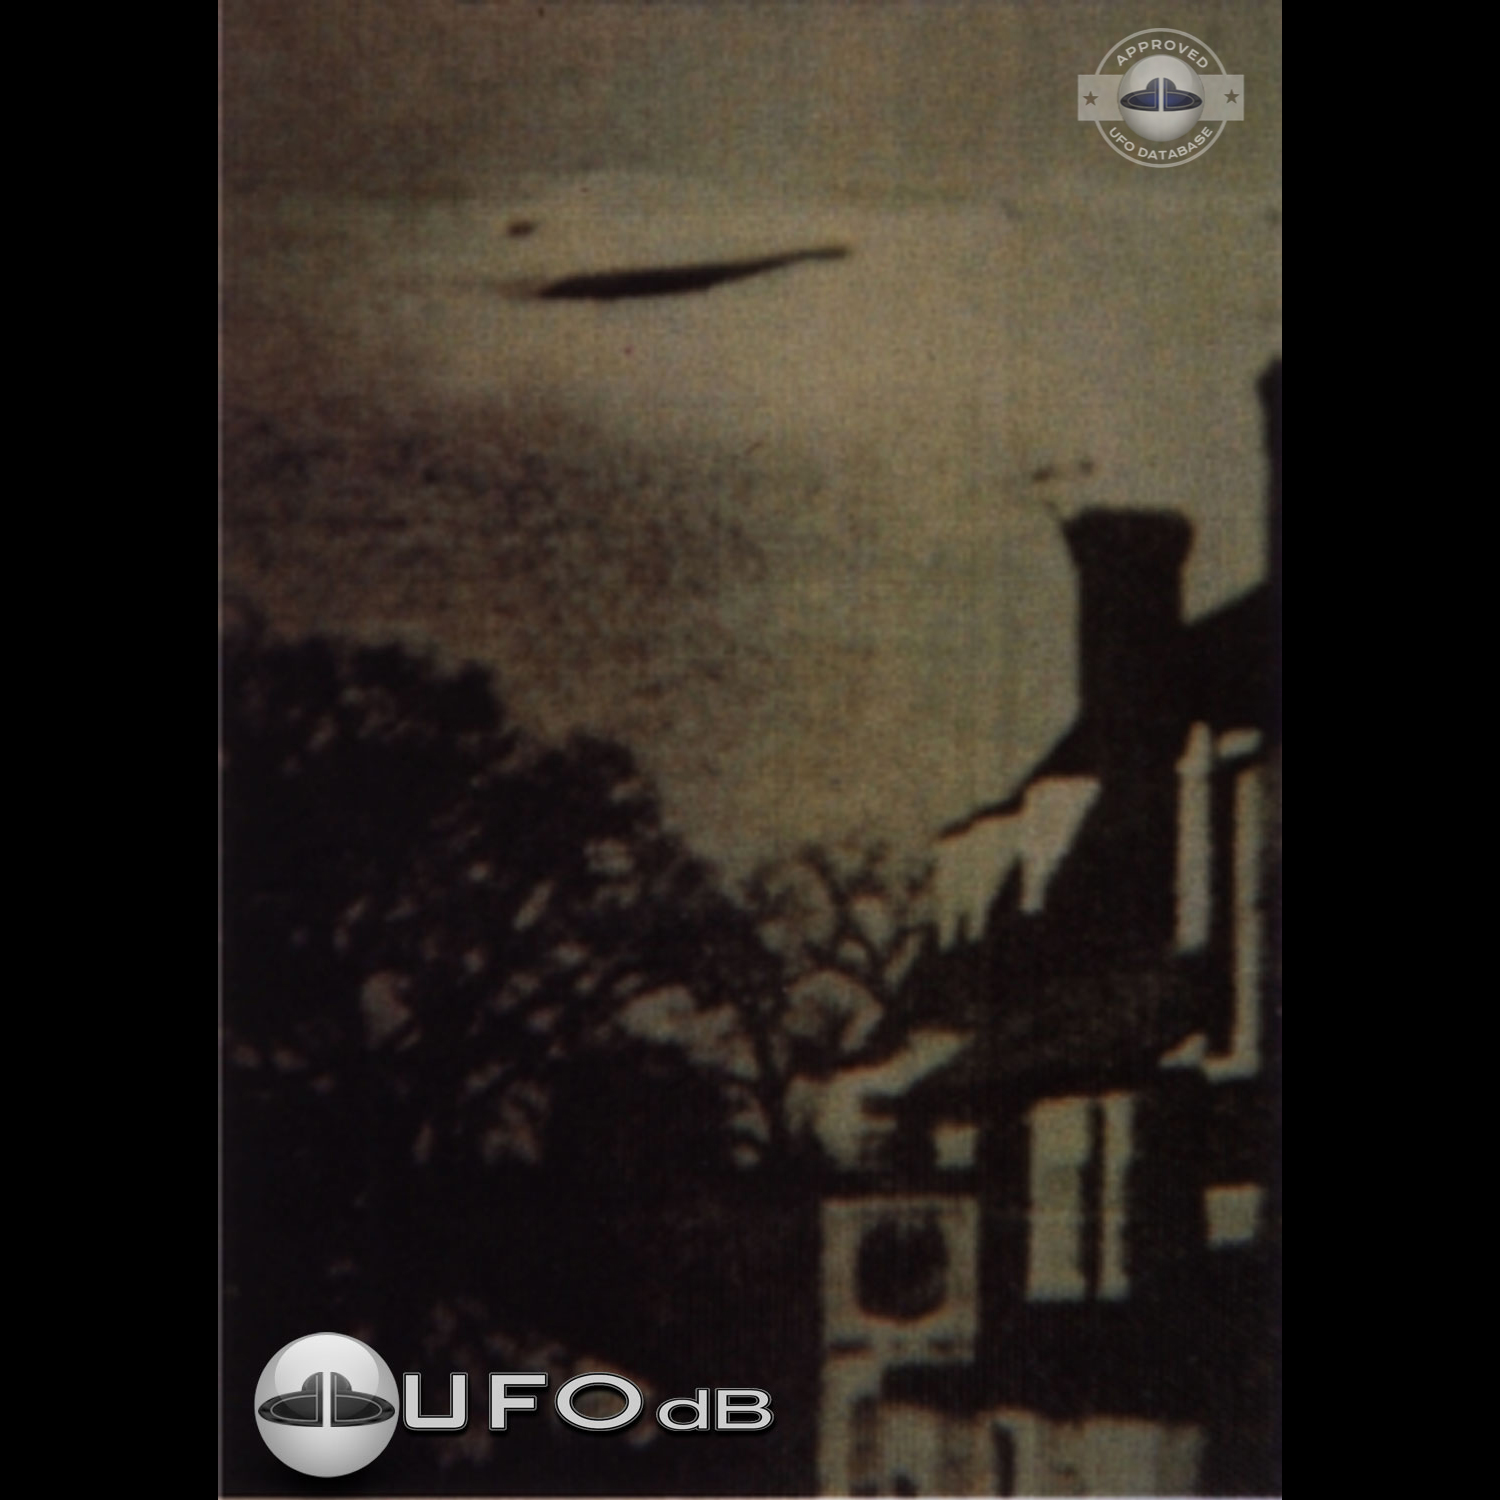 One of the oldest UFO picture taken in 1944 UFO over a house UFO Picture #33-1